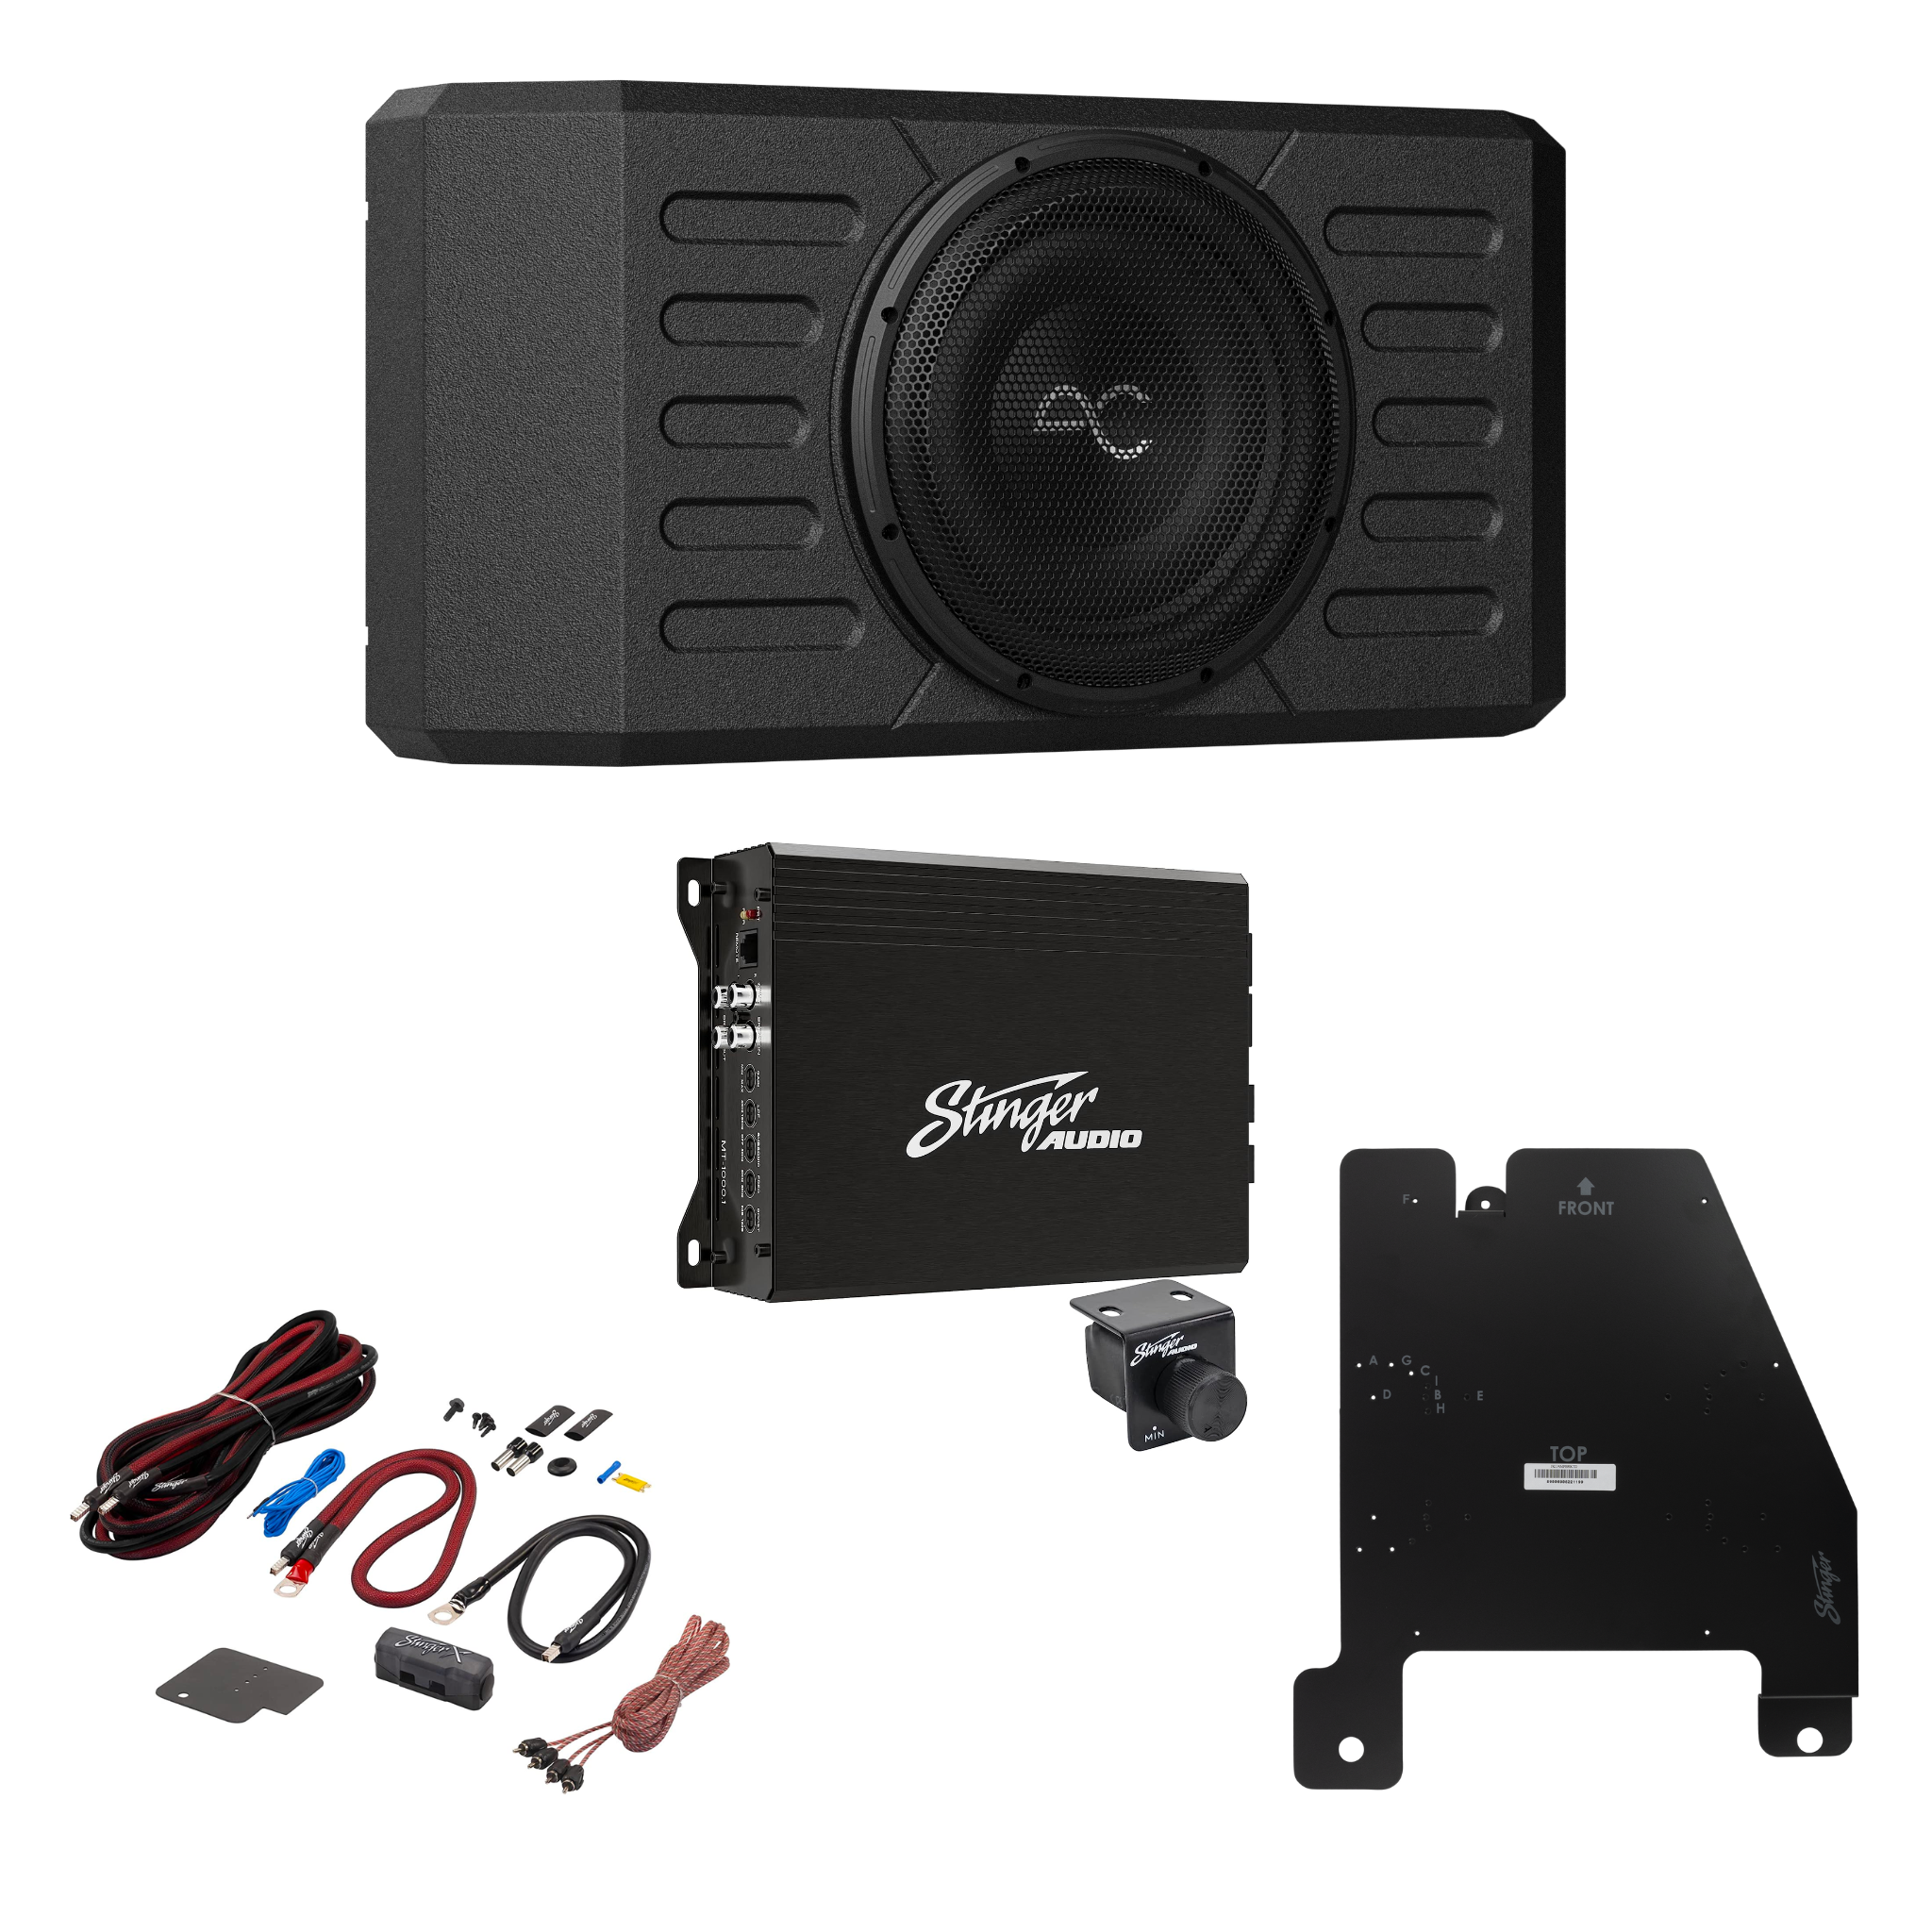 Jeep Wrangler JK Unlimited 12" 400 Watt (RMS) Swing Gate-Mount Loaded Sealed Subwoofer Enclosure with Amplifier and Wiring Kit